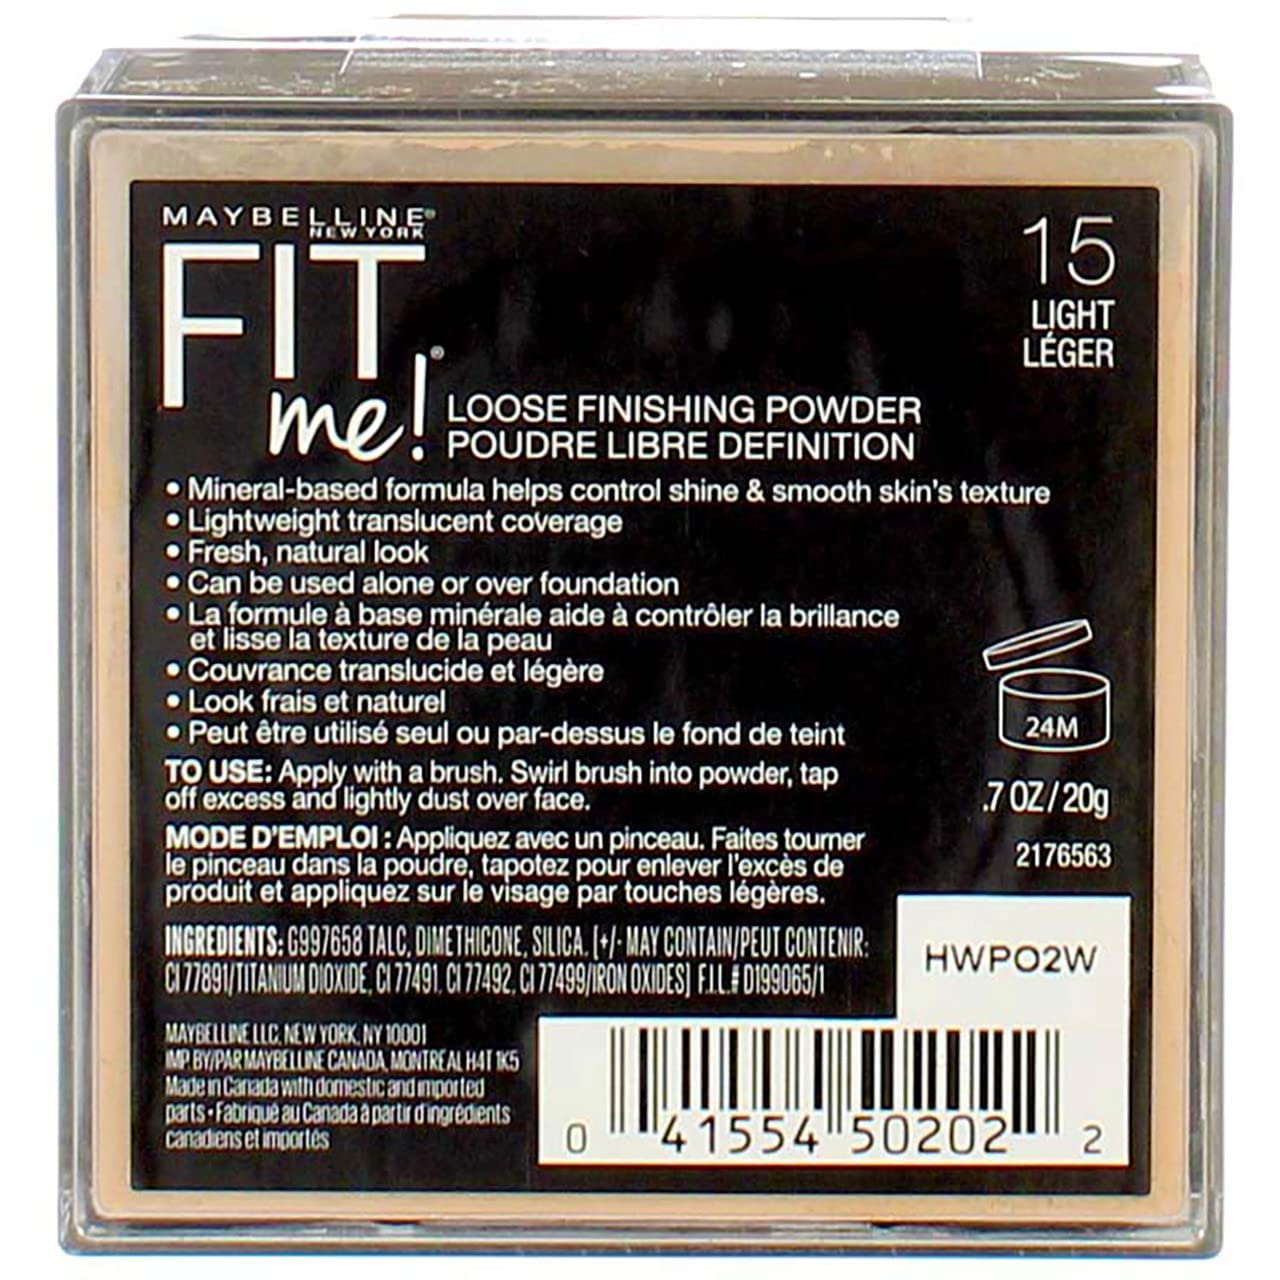 Maybelline New York Maybelline Fit Me Loose Finishing Powder, 15 Light, 0.7 oz (Pack of 2)